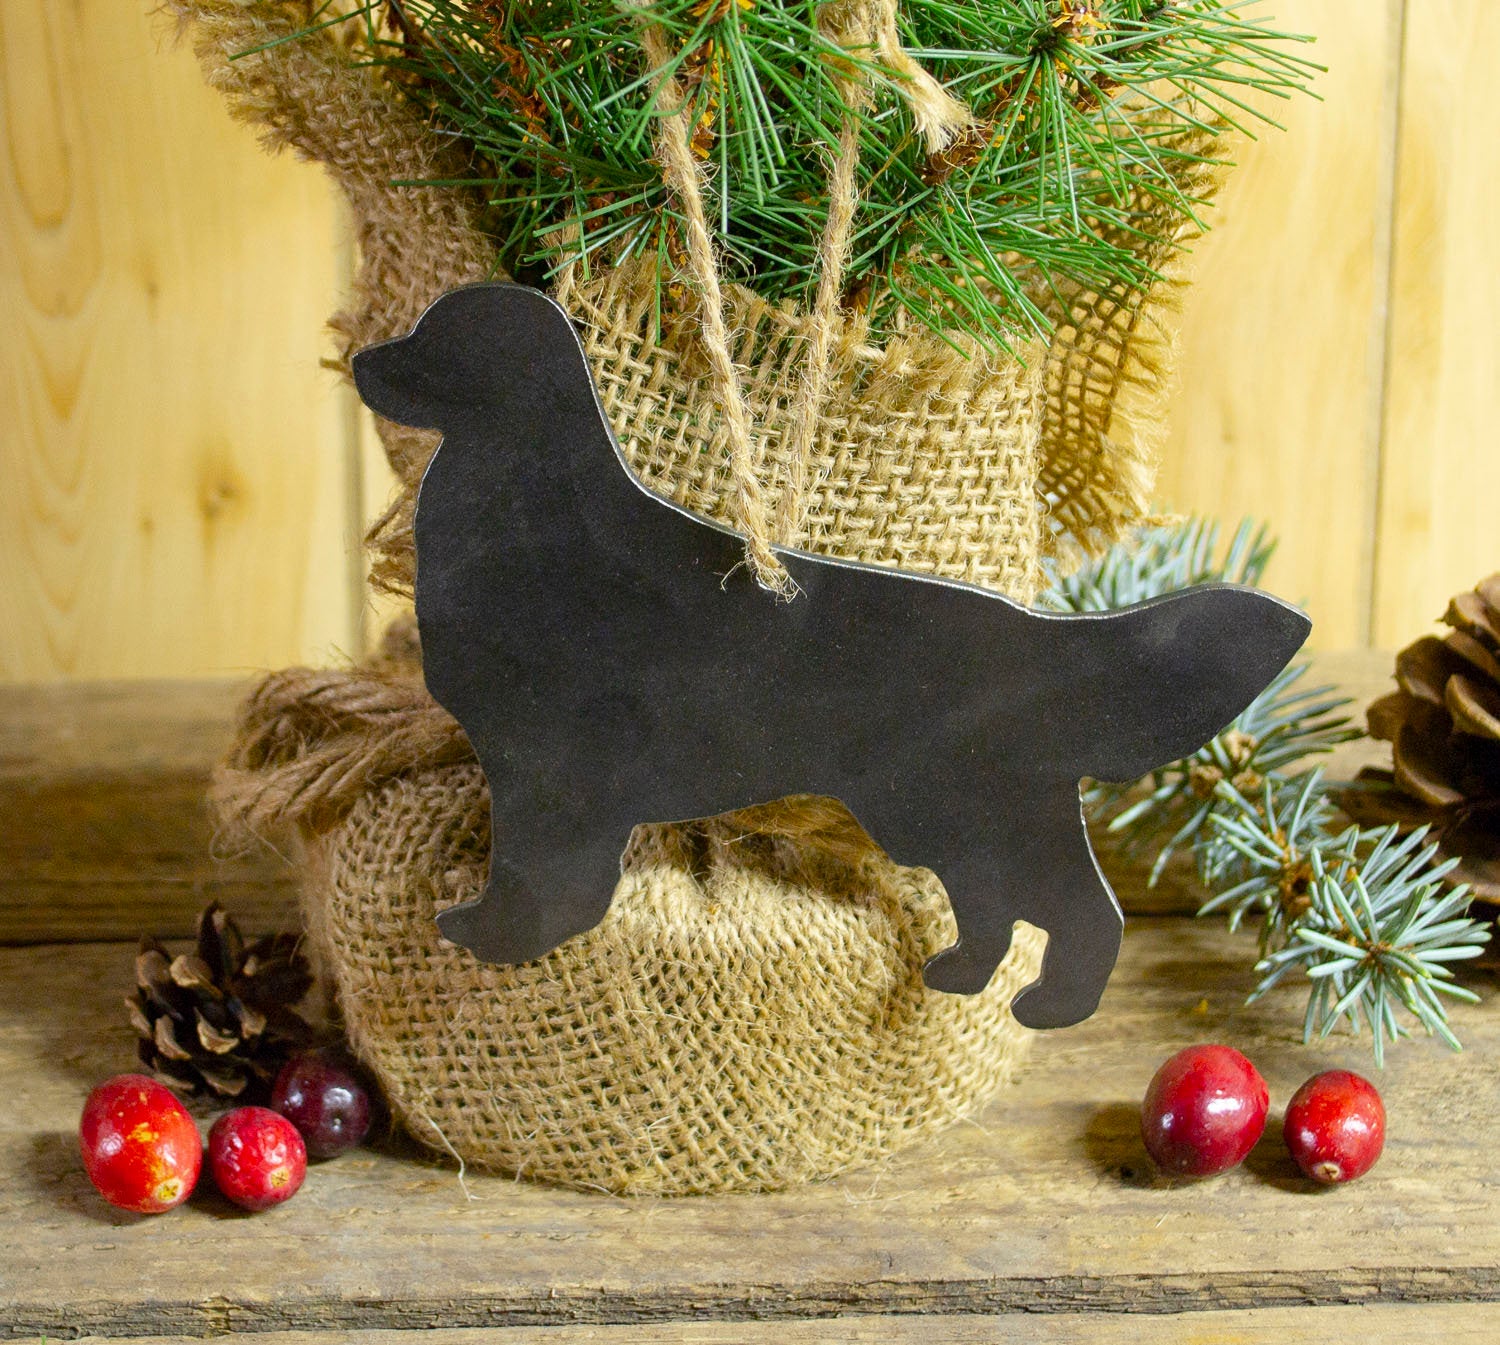 Golden Retriever Dog Metal Christmas Ornament Tree Stocking Stuffer Party Favor Holiday Decoration Raw Steel Gift Recycled Nature Home Decor